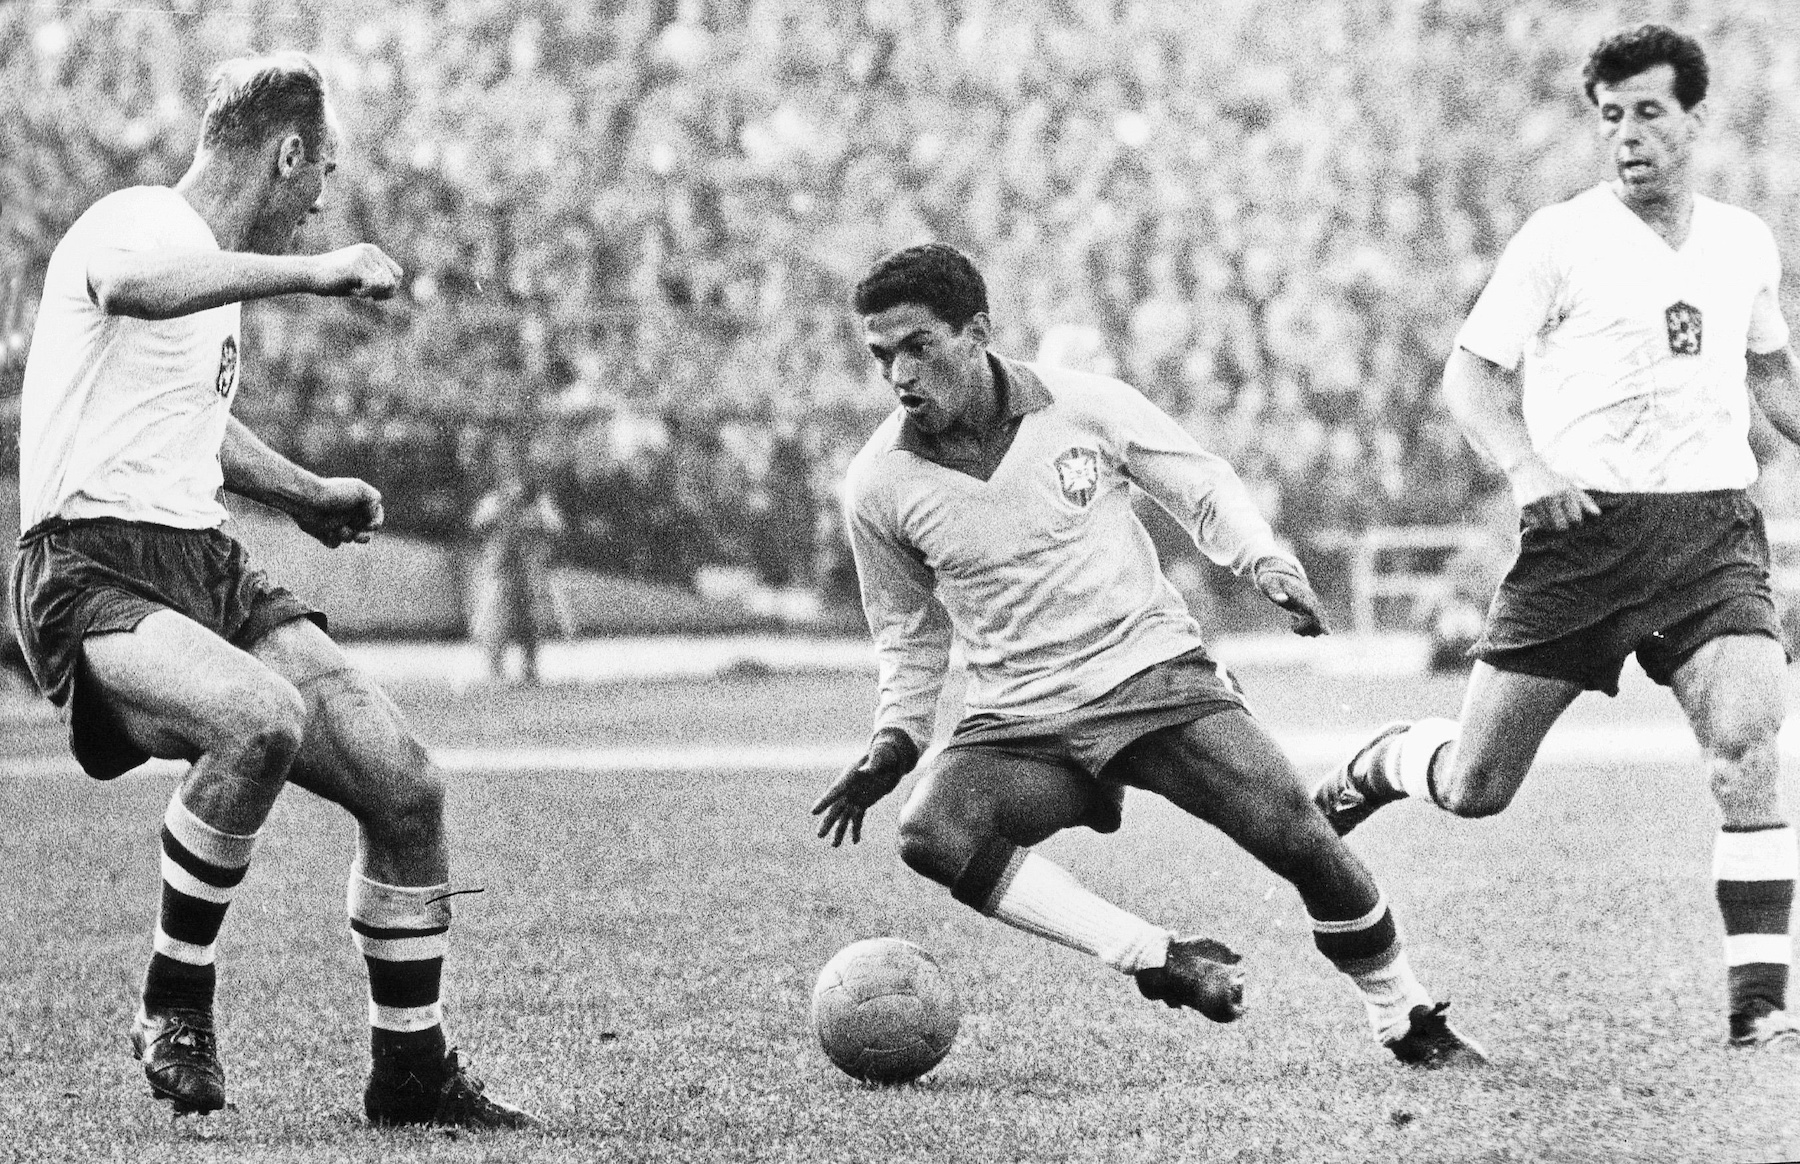 The fascinating peak of Garrincha during the 1962 World Cup